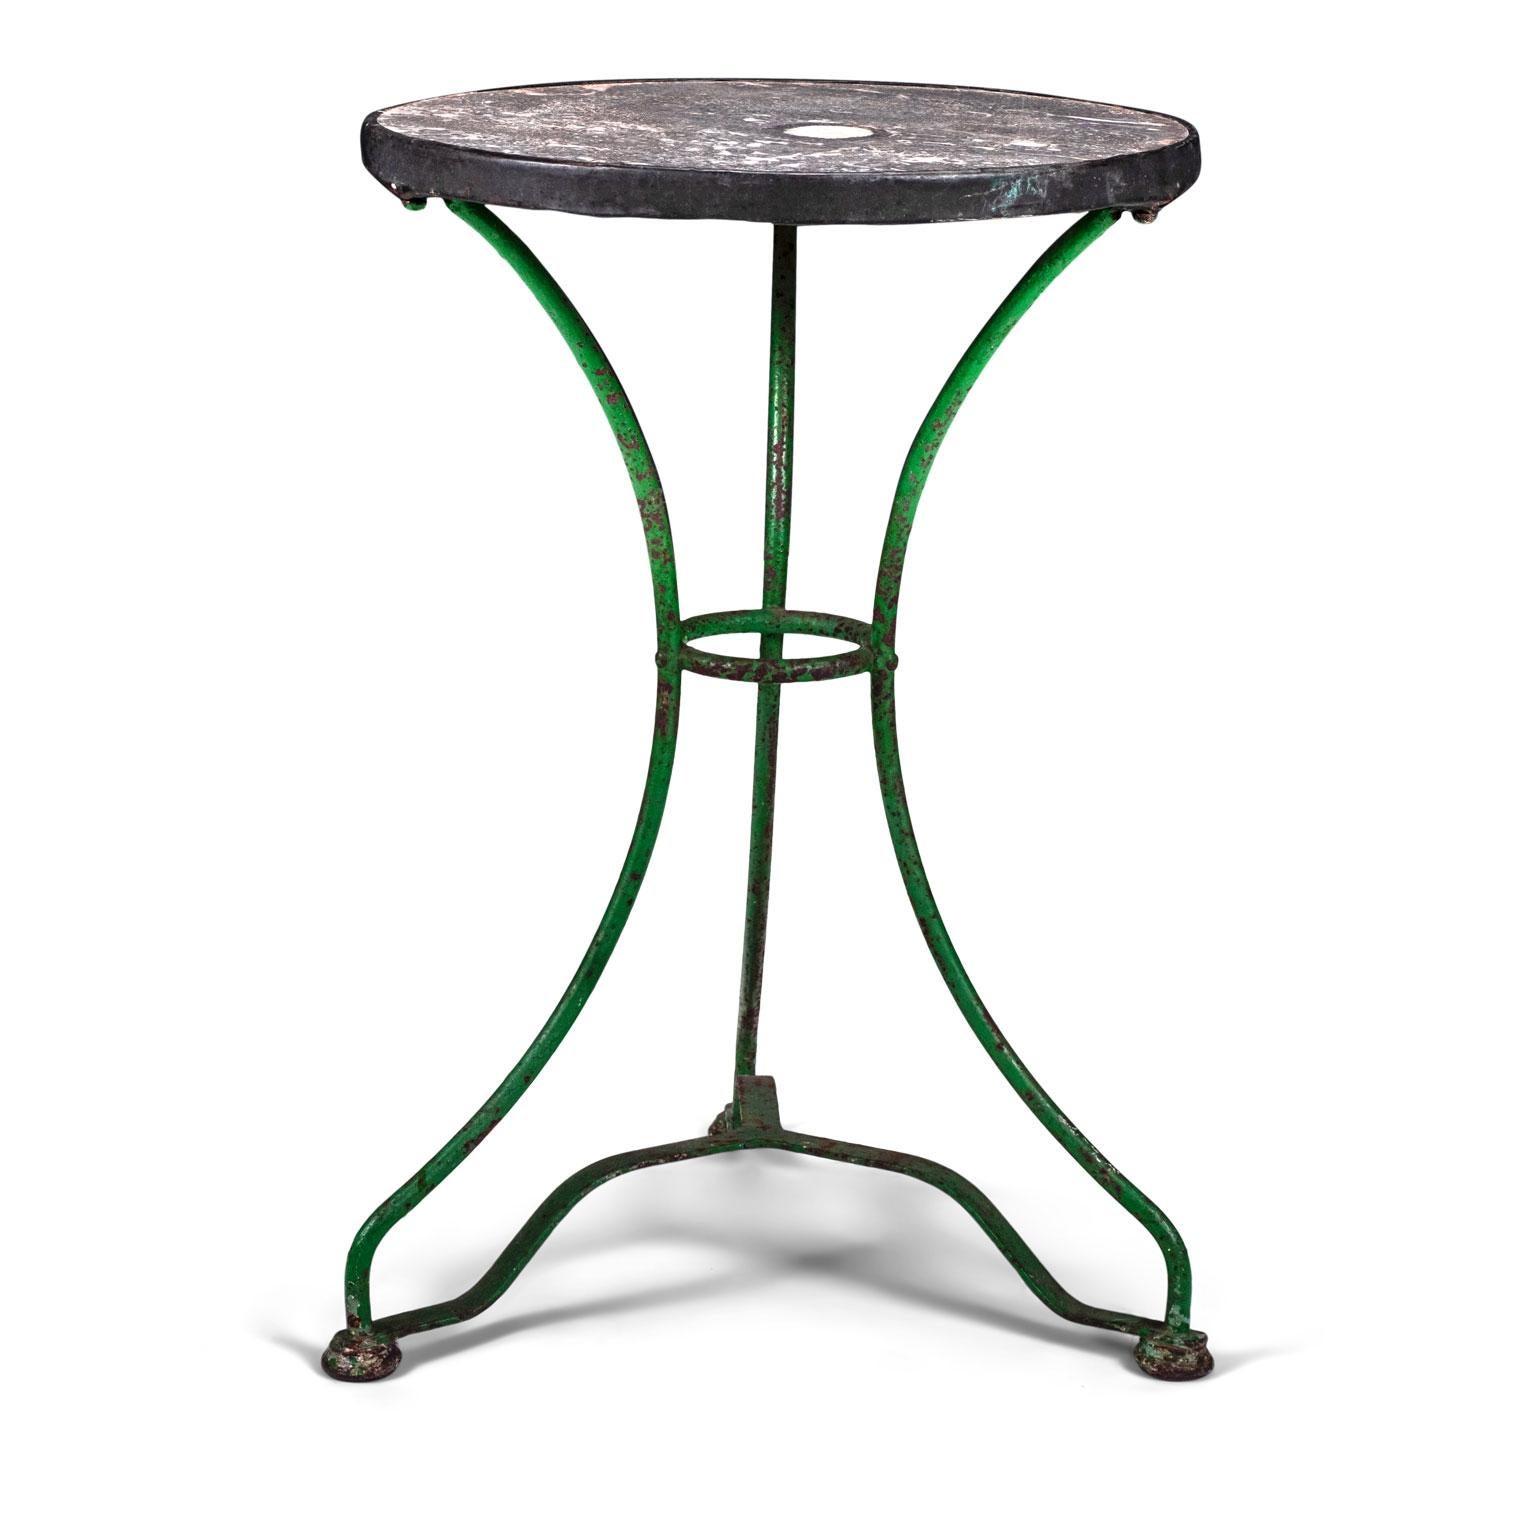 French Provincial Green Painted Iron Base and Marble Top Garden Table